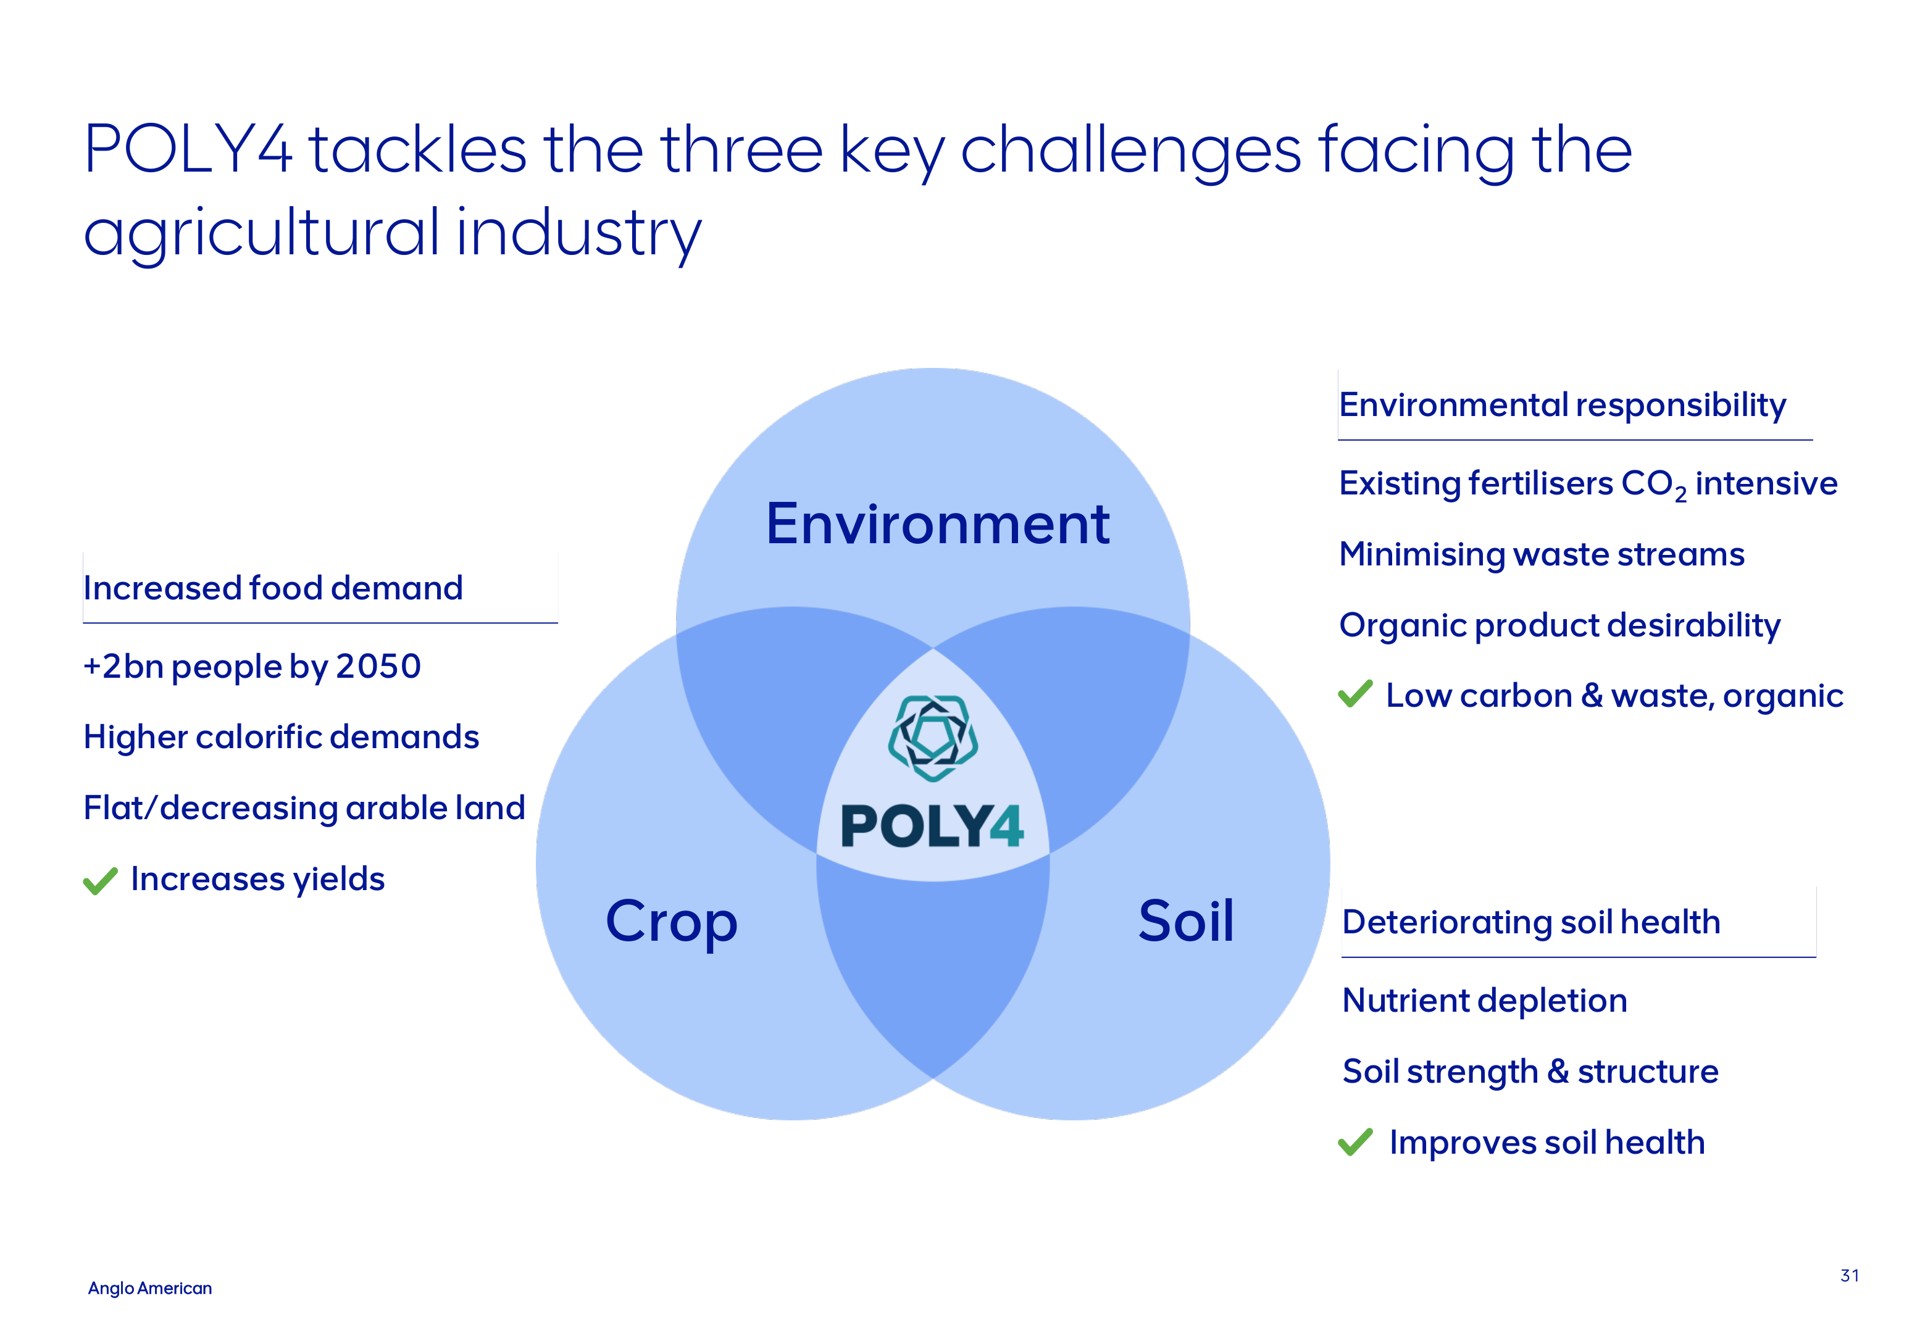 poly tackles the three key challenges facing the agricultural industry crop | AngloAmerican